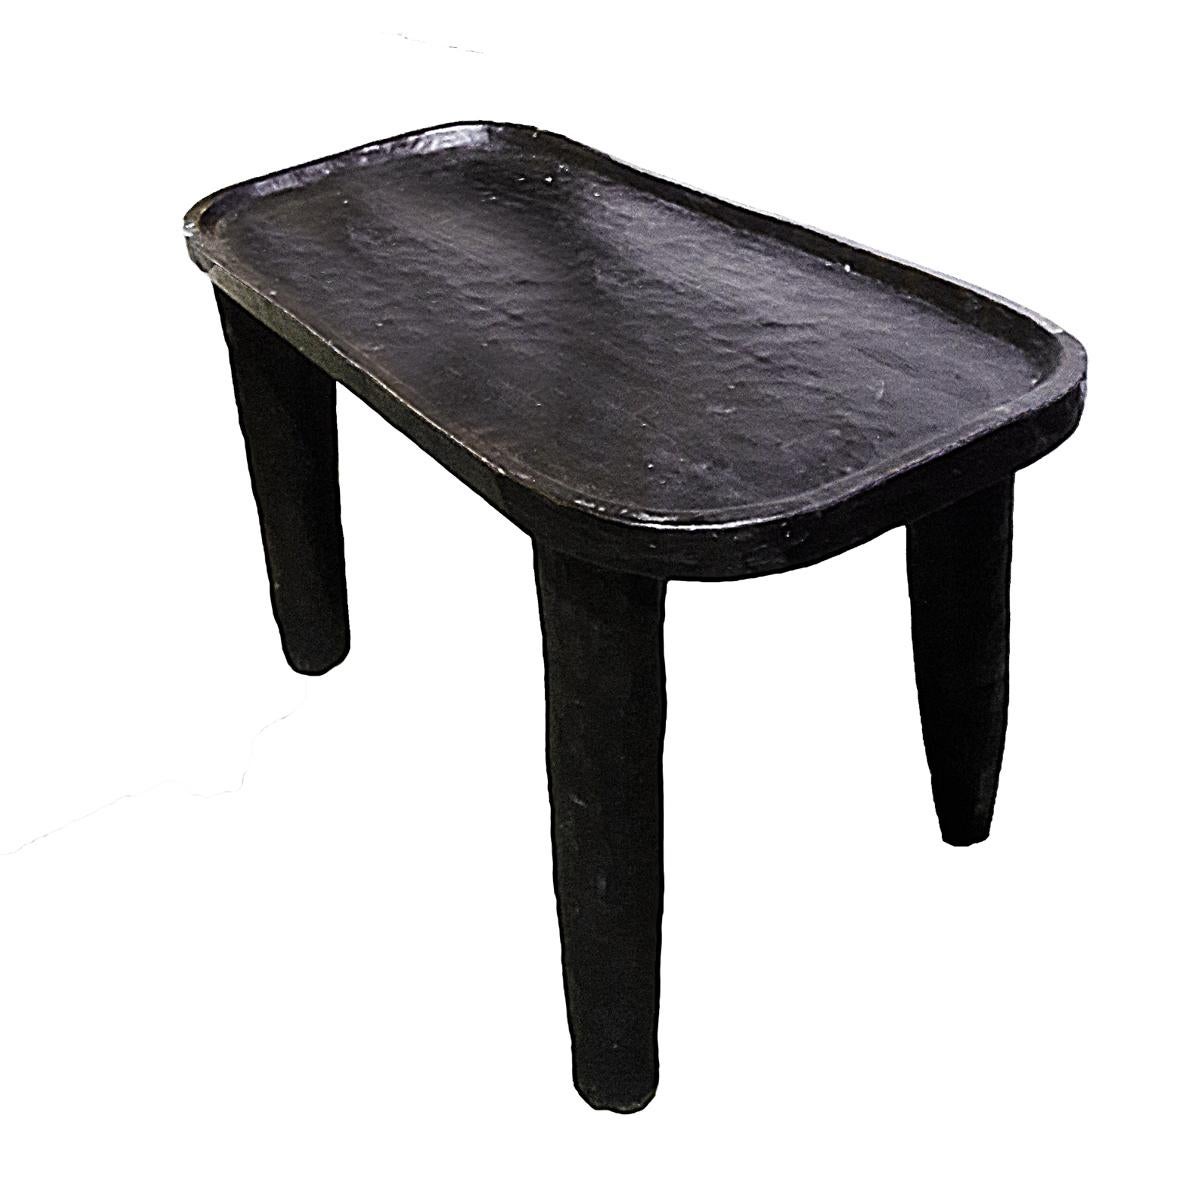 A vintage rustic table, hand carved in Ethiopia, circa 1980. Dark finish. Ideal as a coffee table or an end table in any contemporary / organic decor.